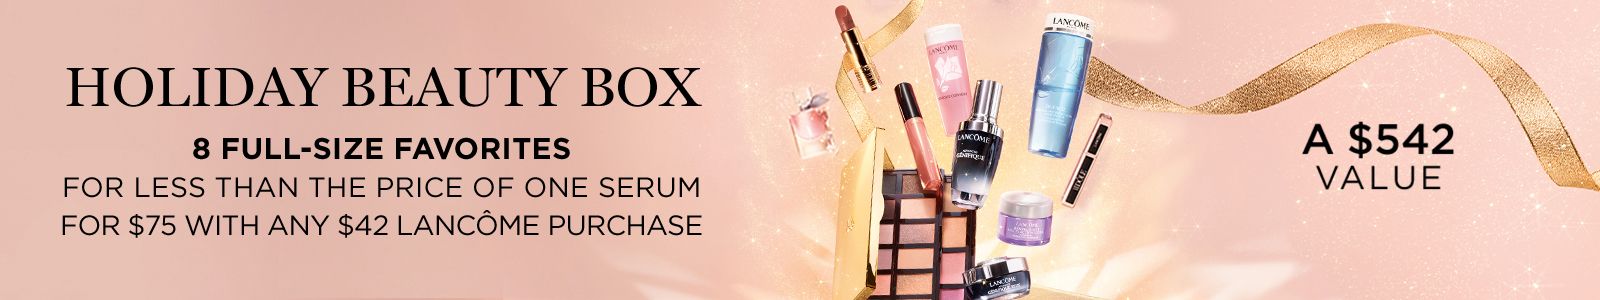 Holiday Beauty Box, 8 Full-Size Favorites, For less than the price of one serum for $75 with any $42 Lancome purchase, A $542 Value